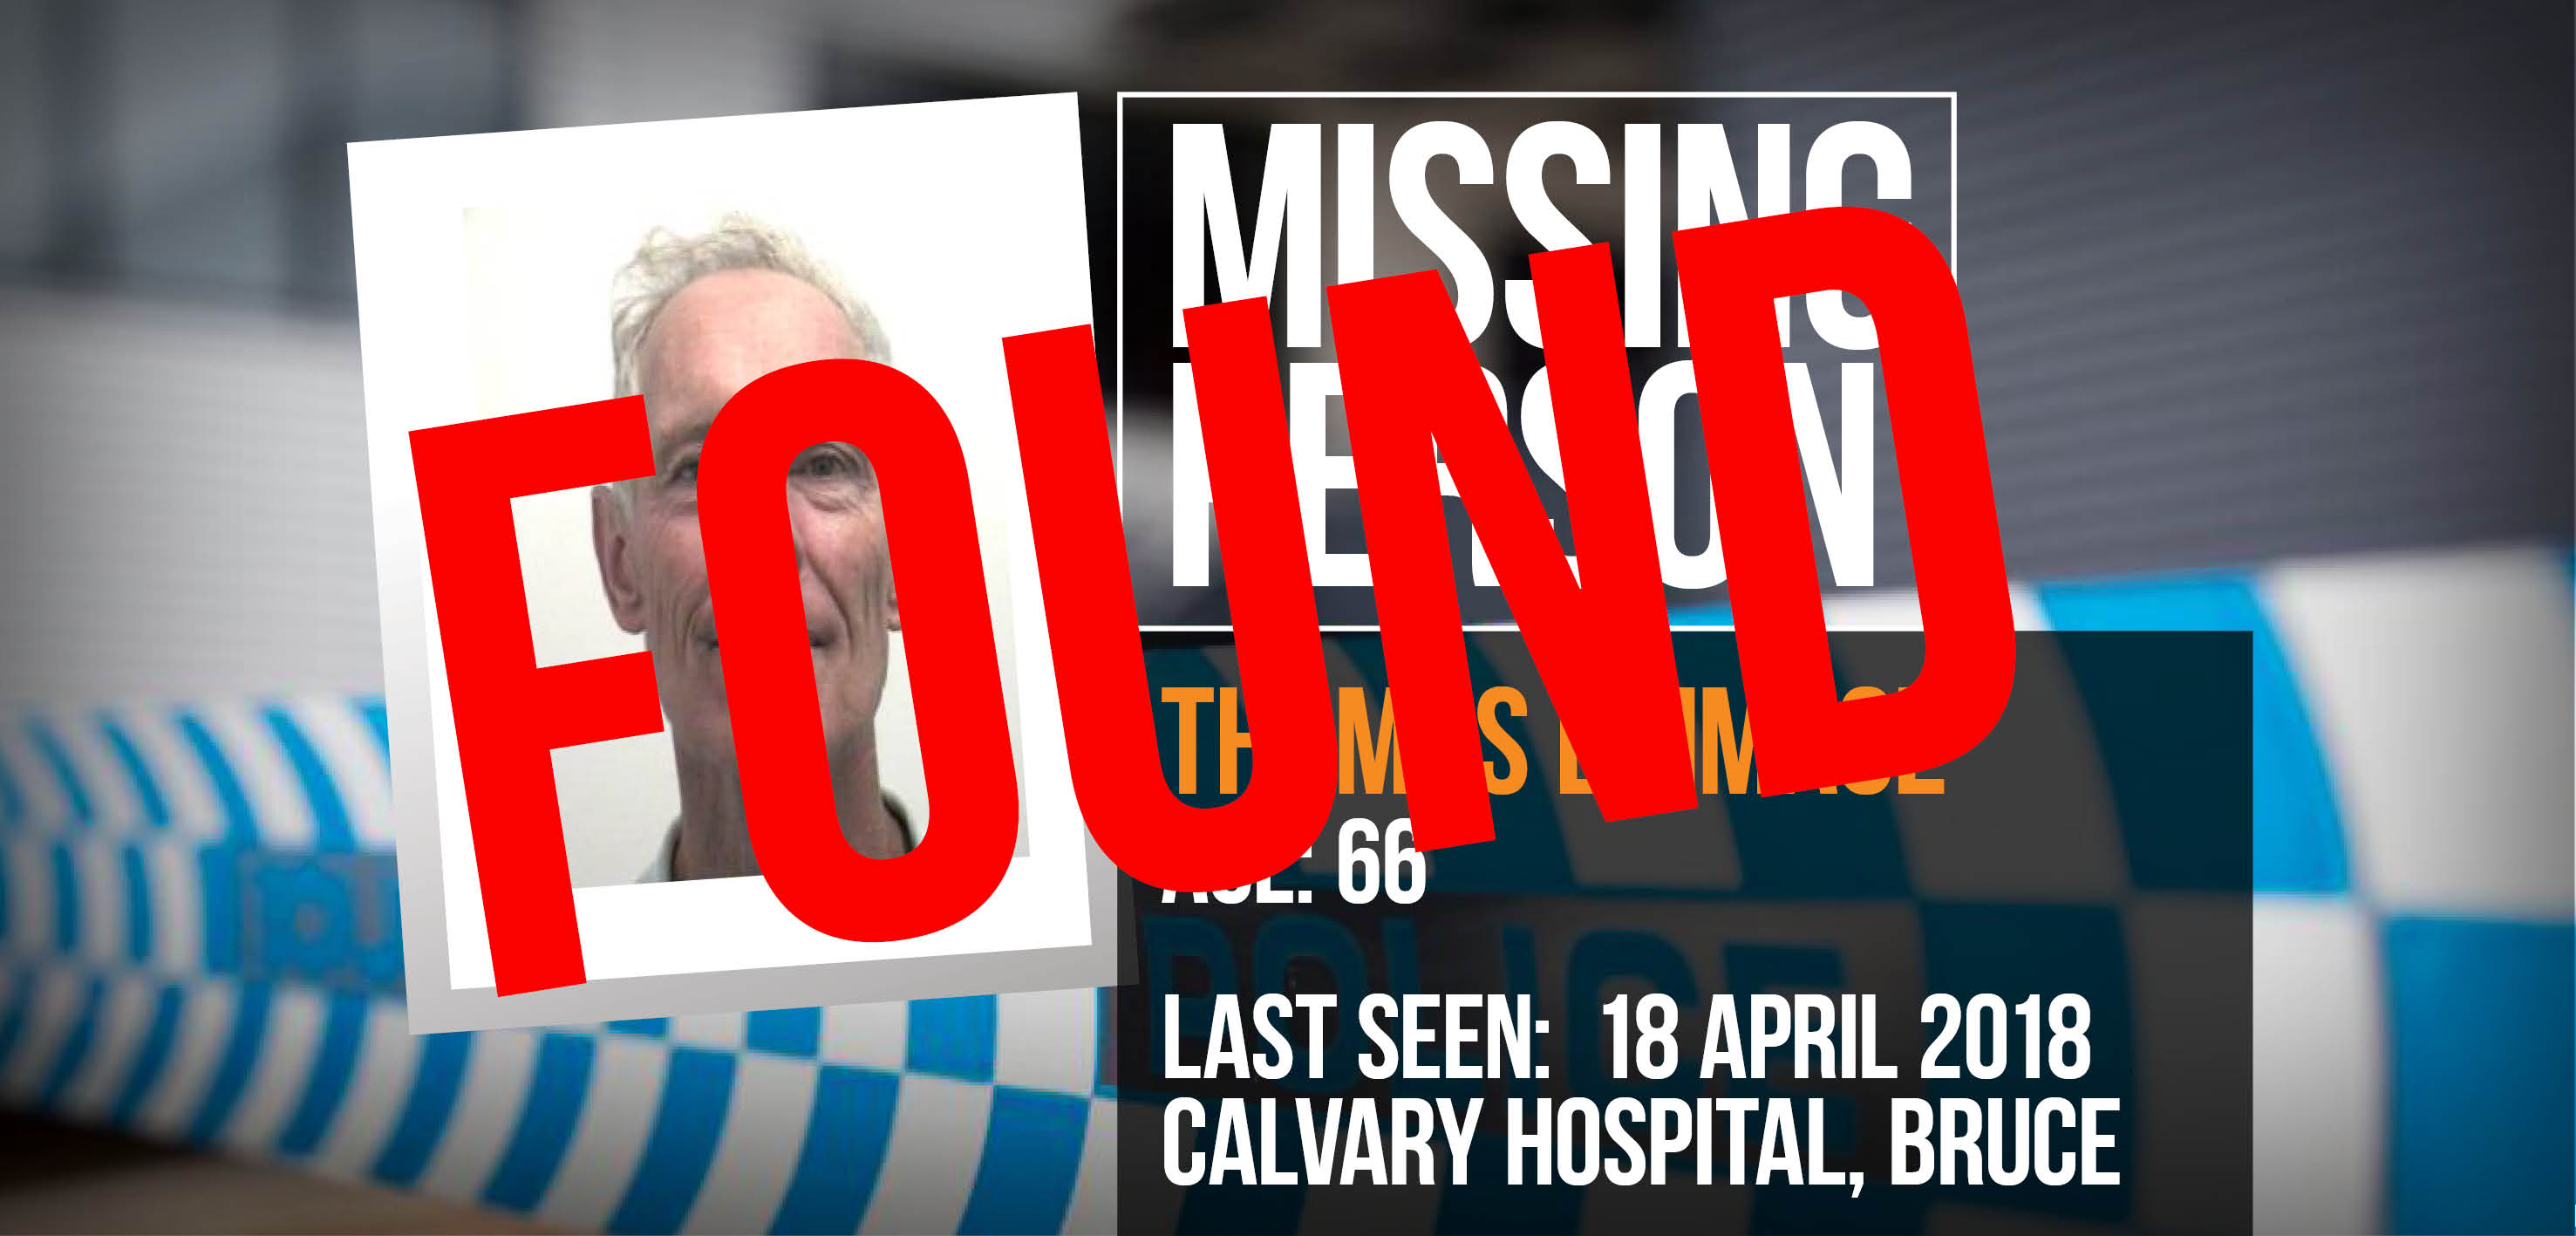 Update: Missing person Thomas Brimage has been found safe and well.